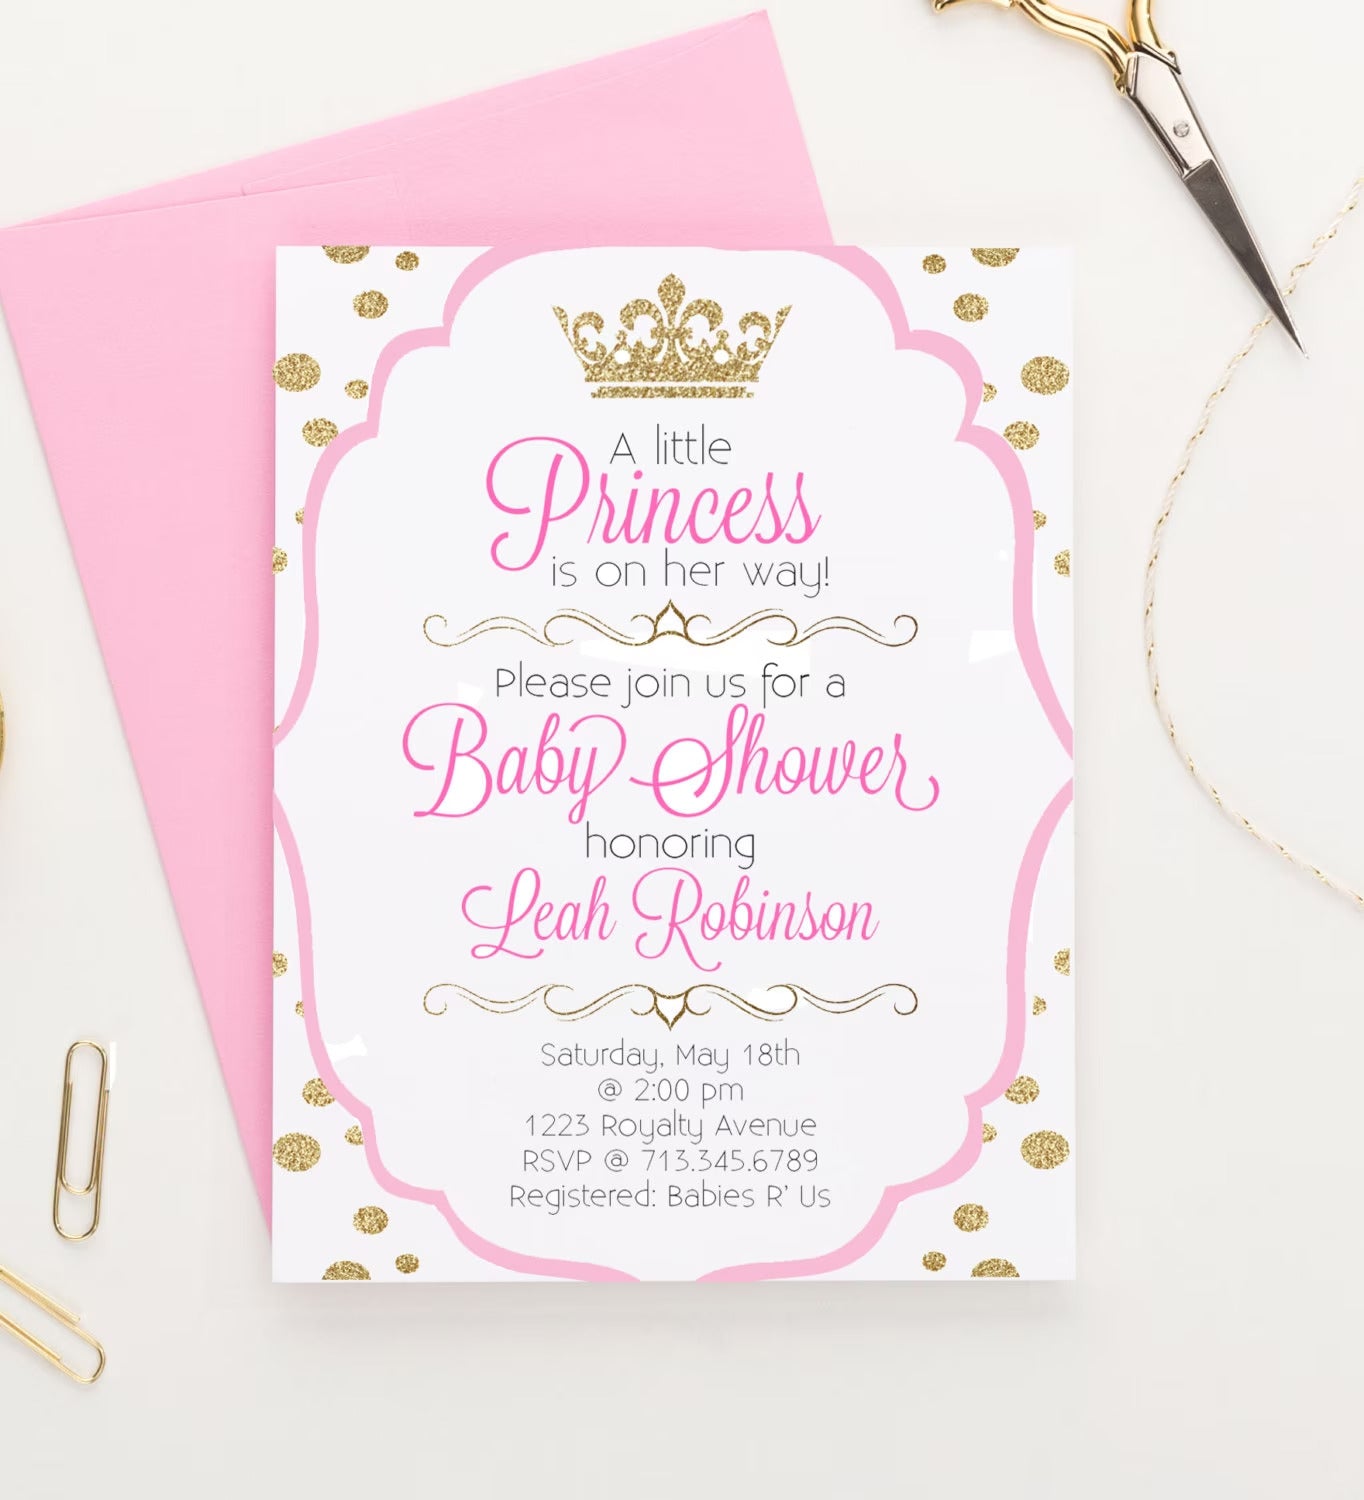 Personalized Pink Princess Baby Shower Invitations With Gold Crown